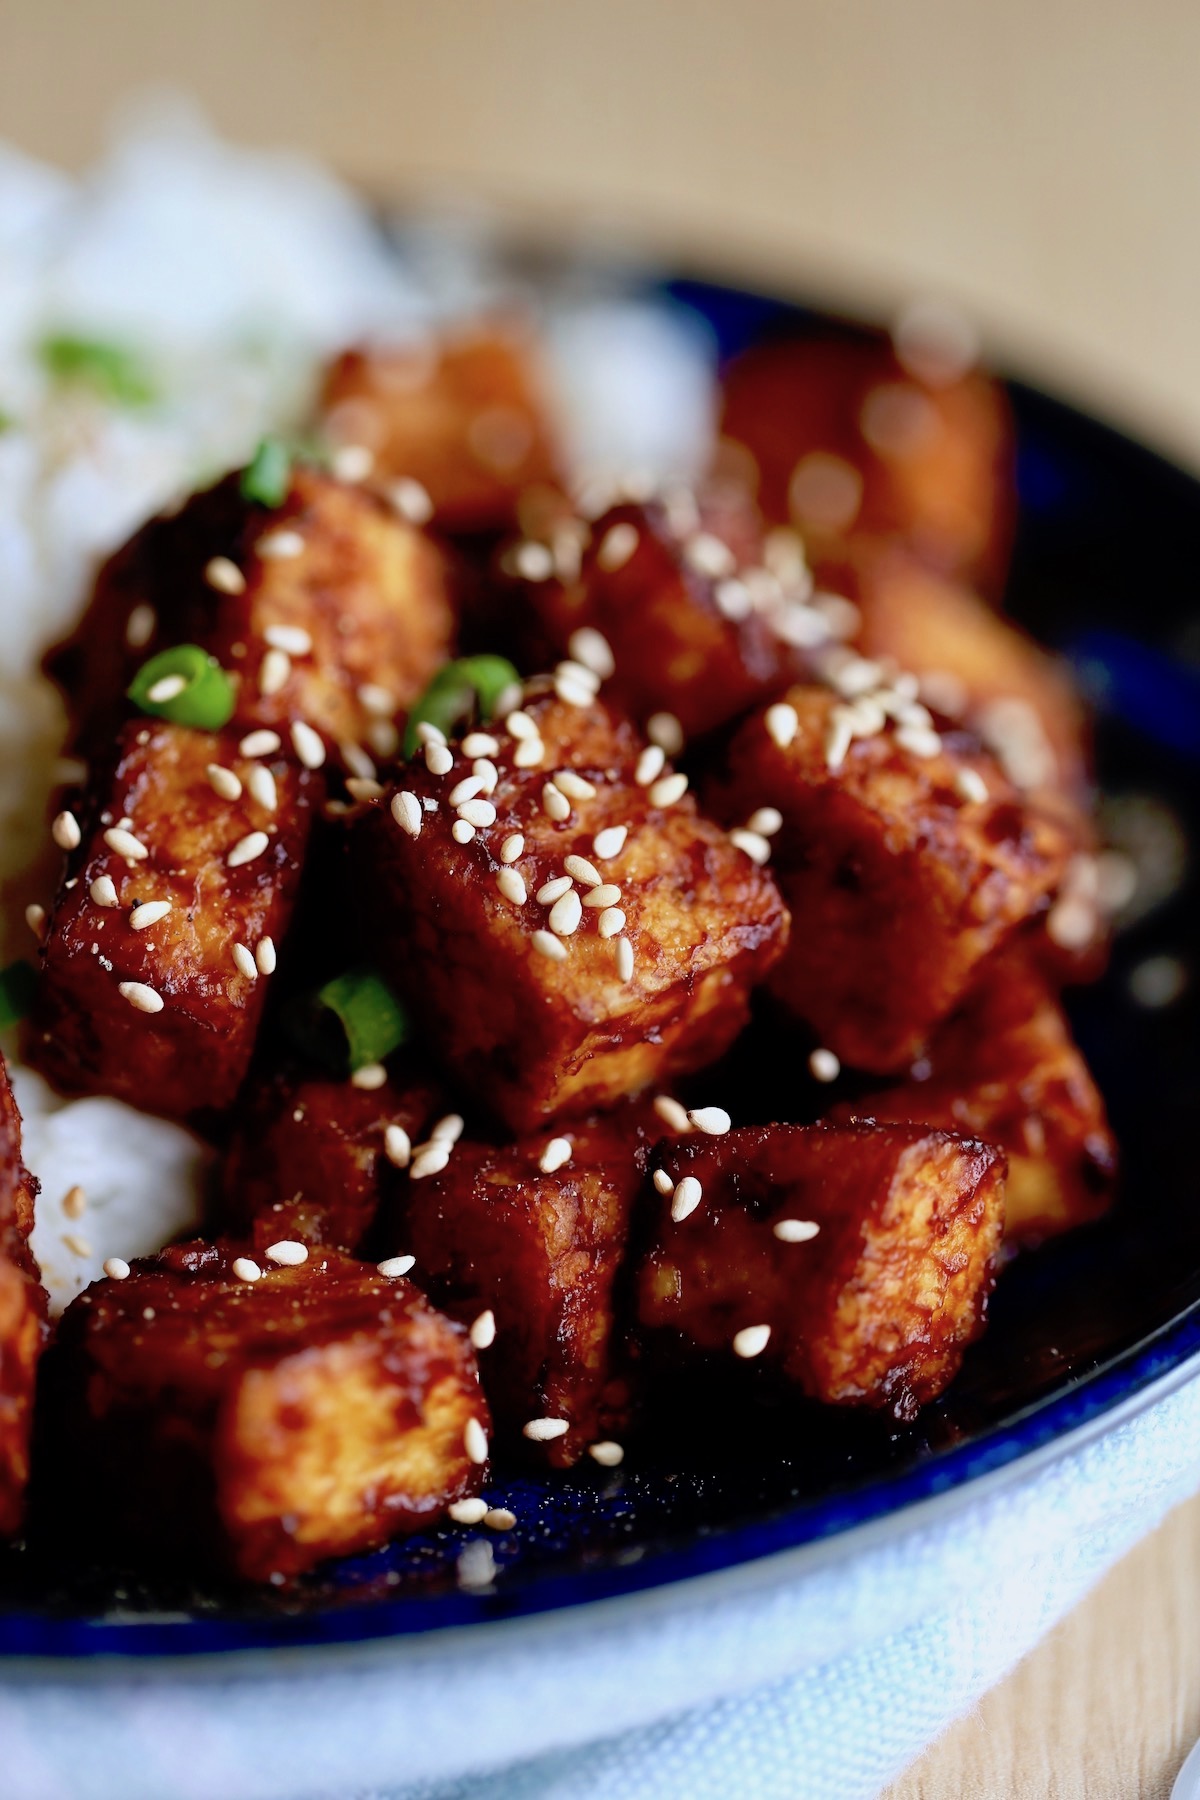 Sweet and sour tofu served with coconut rice and garnished with green onion and sesame seeds